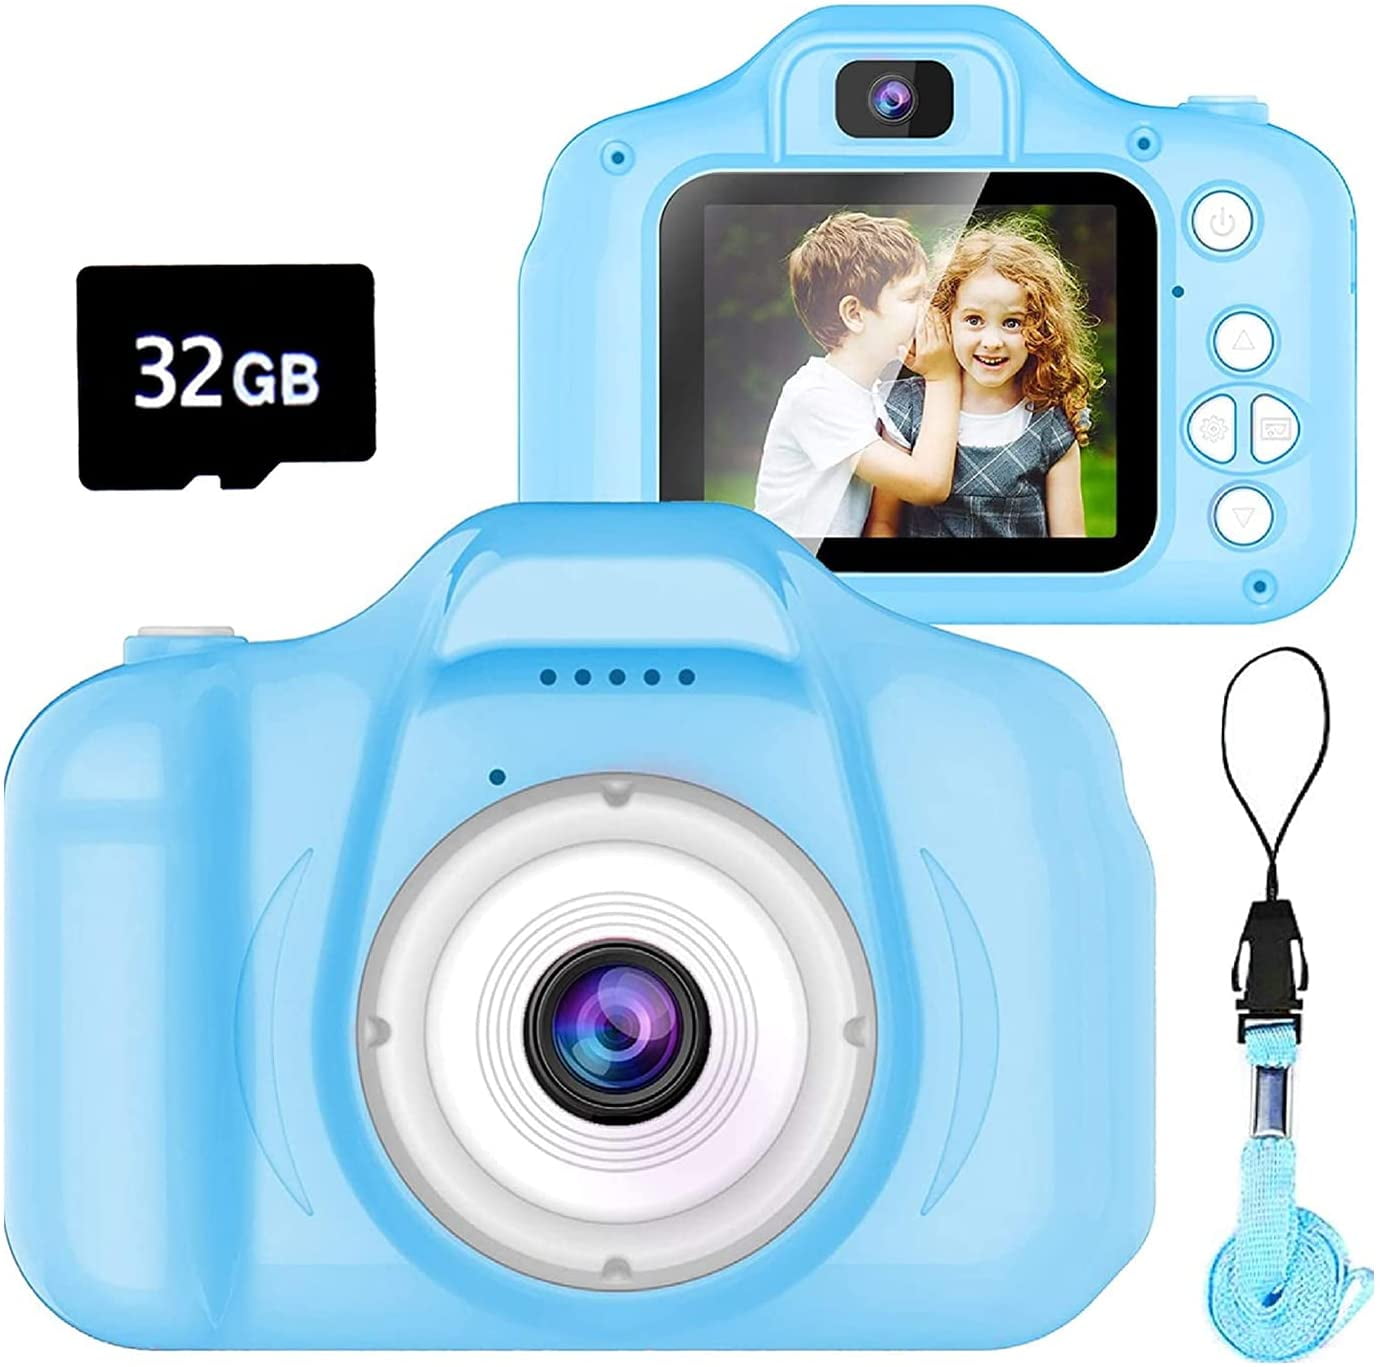 Kids Digital Selfie Camera Peradix Kids Camera with 32GB SD Card HD Digital Video Recorder Cameras Toys-2.0 1080P Best Birthday Gift for Toddlers Boys Girls Age 3 Year and up Blue 